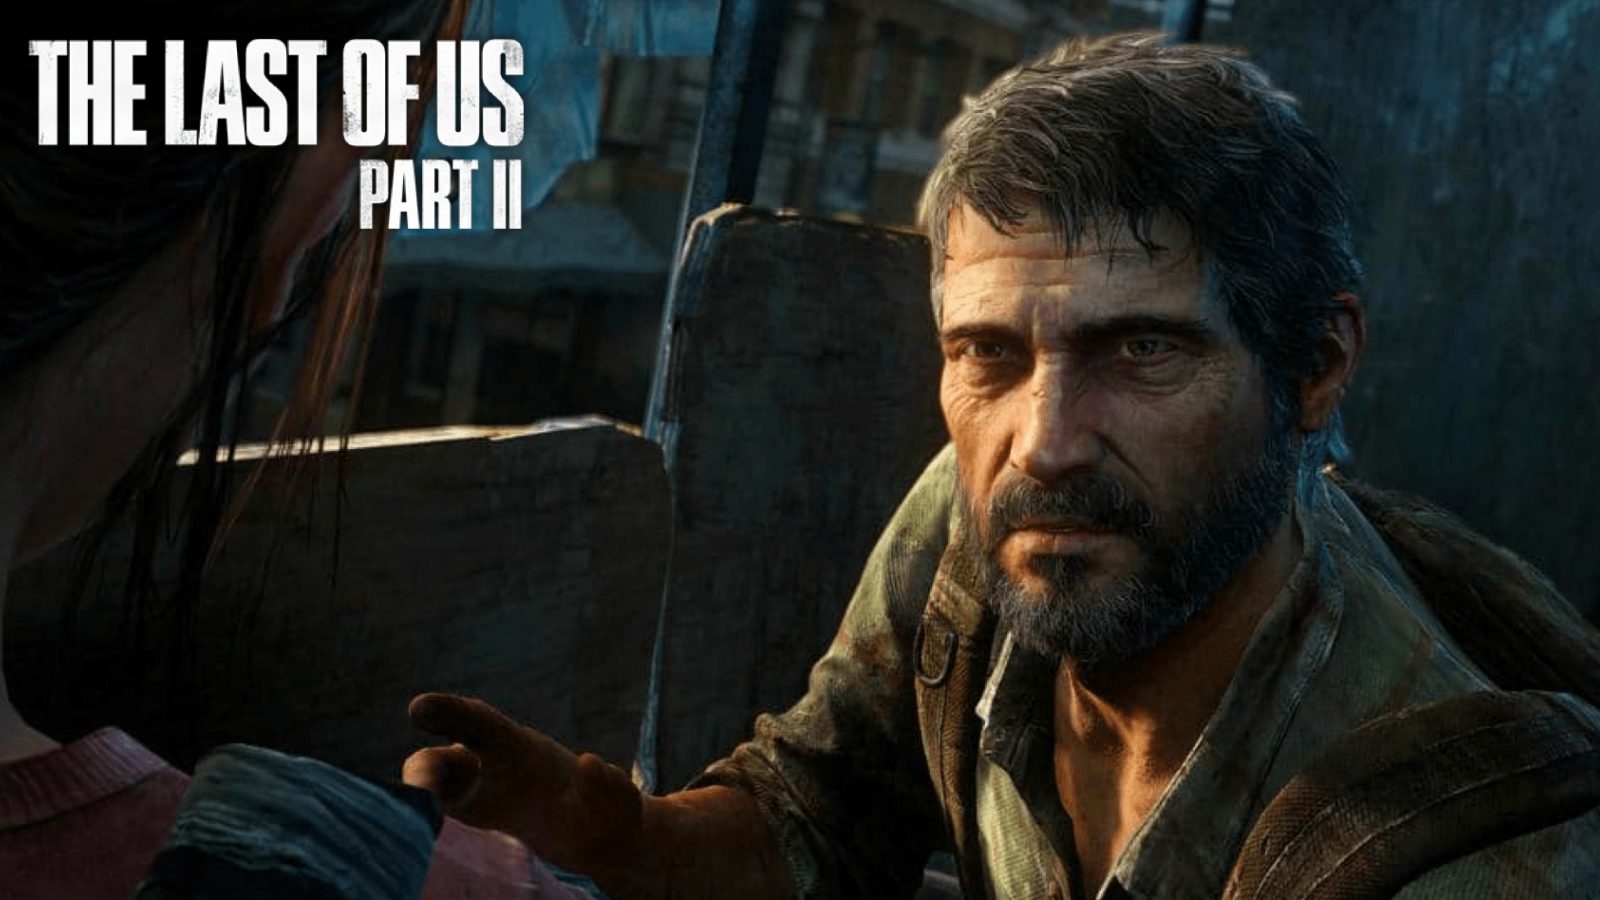 Troy Baker thinks The Last of Us' Joel would consider himself a villain